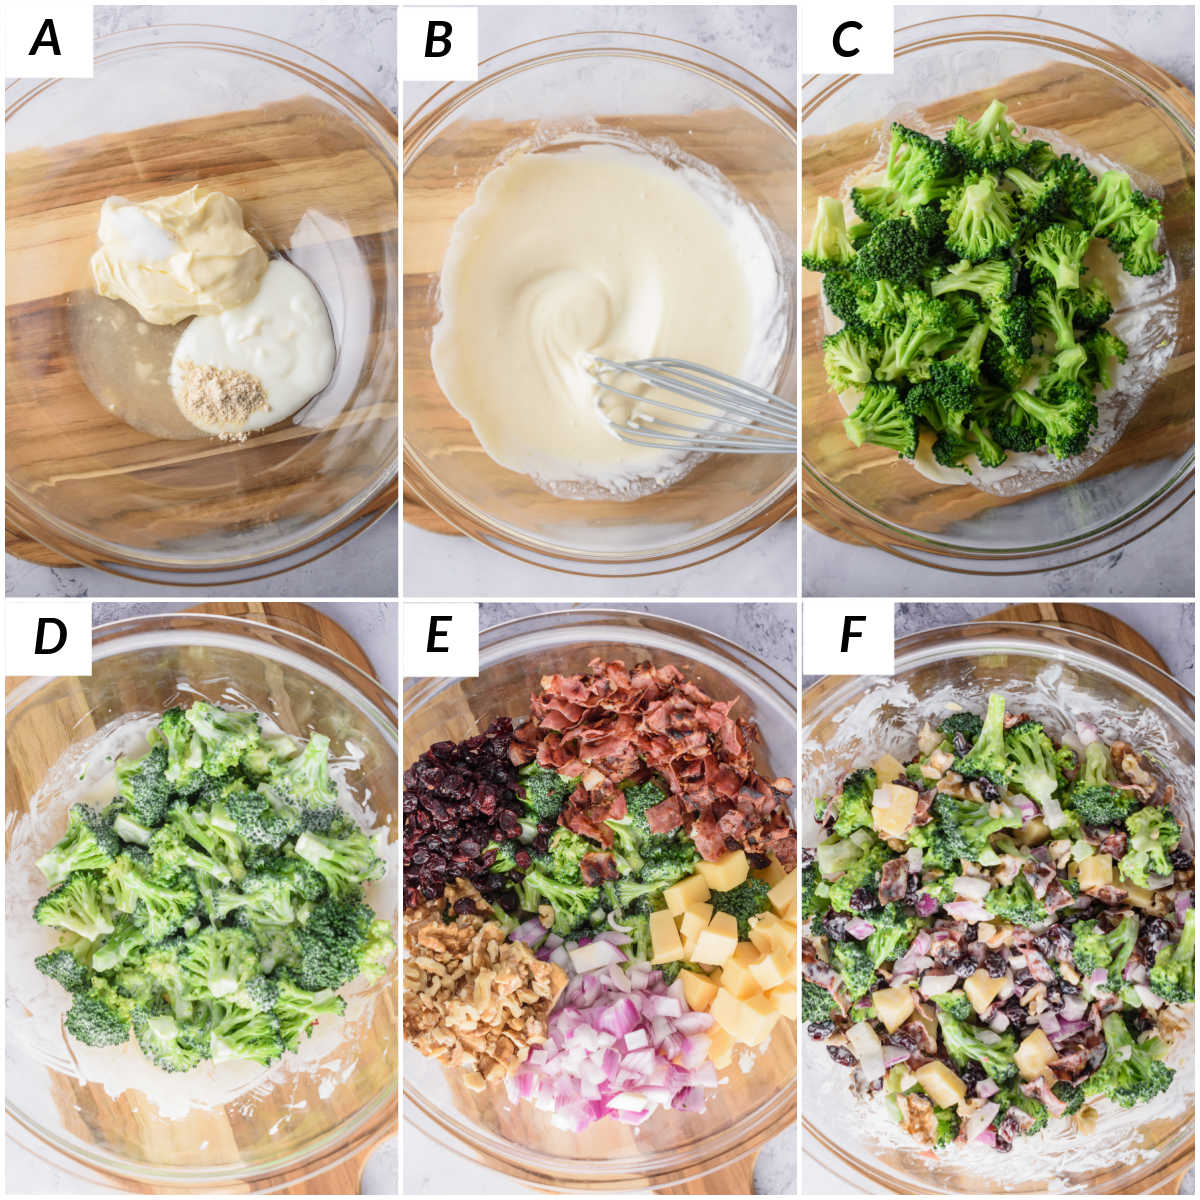 image collage showing the steps for making broccoli cranberry salad